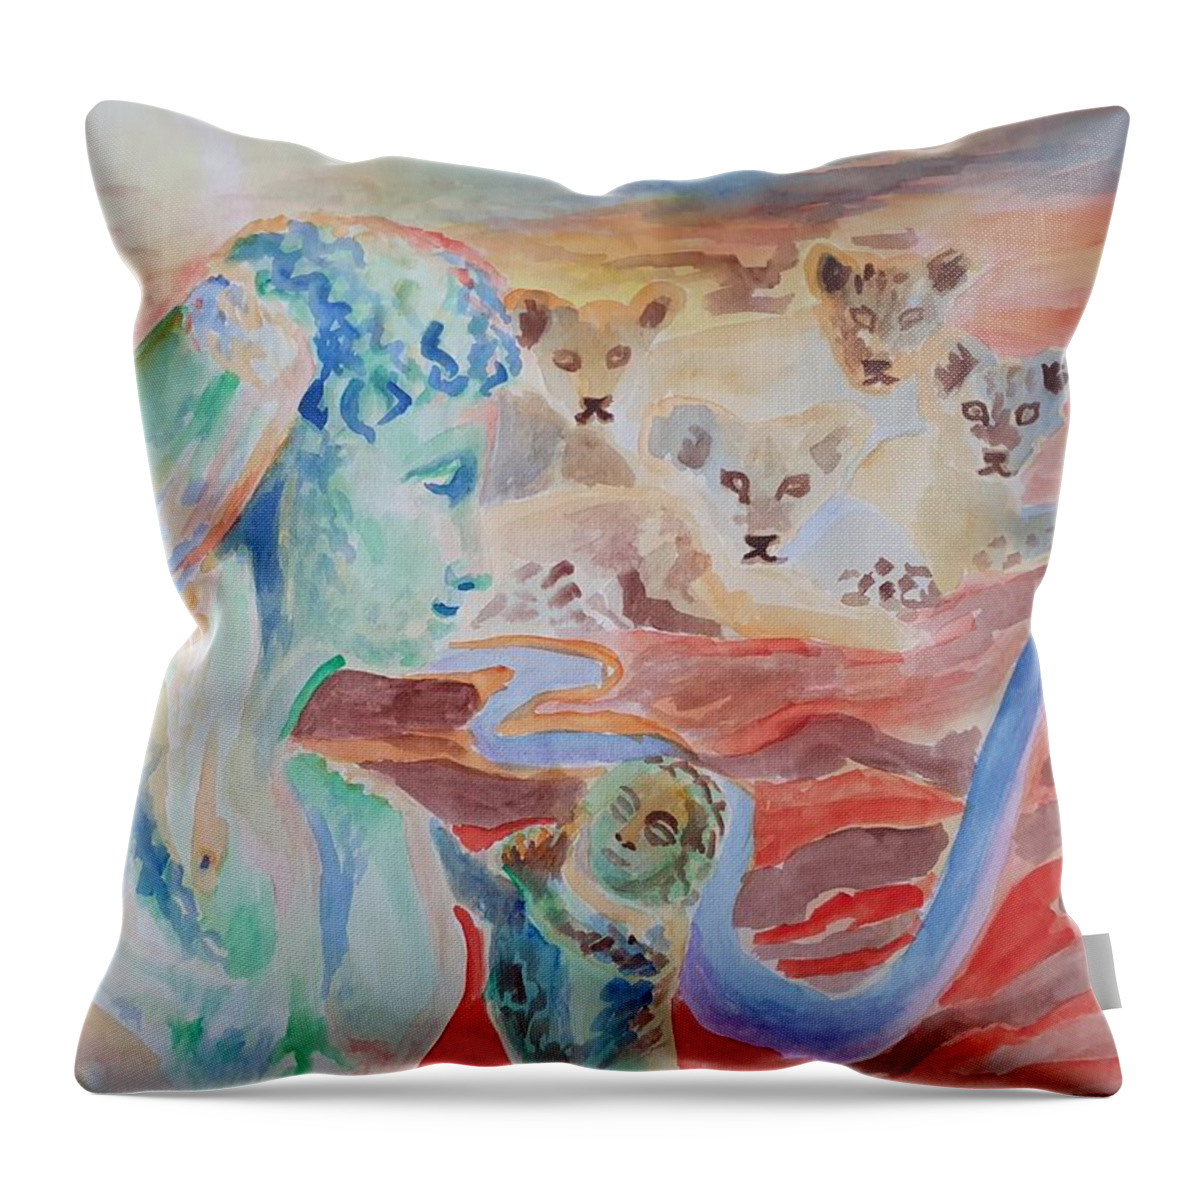 Classical Greek Sculpture Throw Pillow featuring the painting Amore and Psyche by Enrico Garff